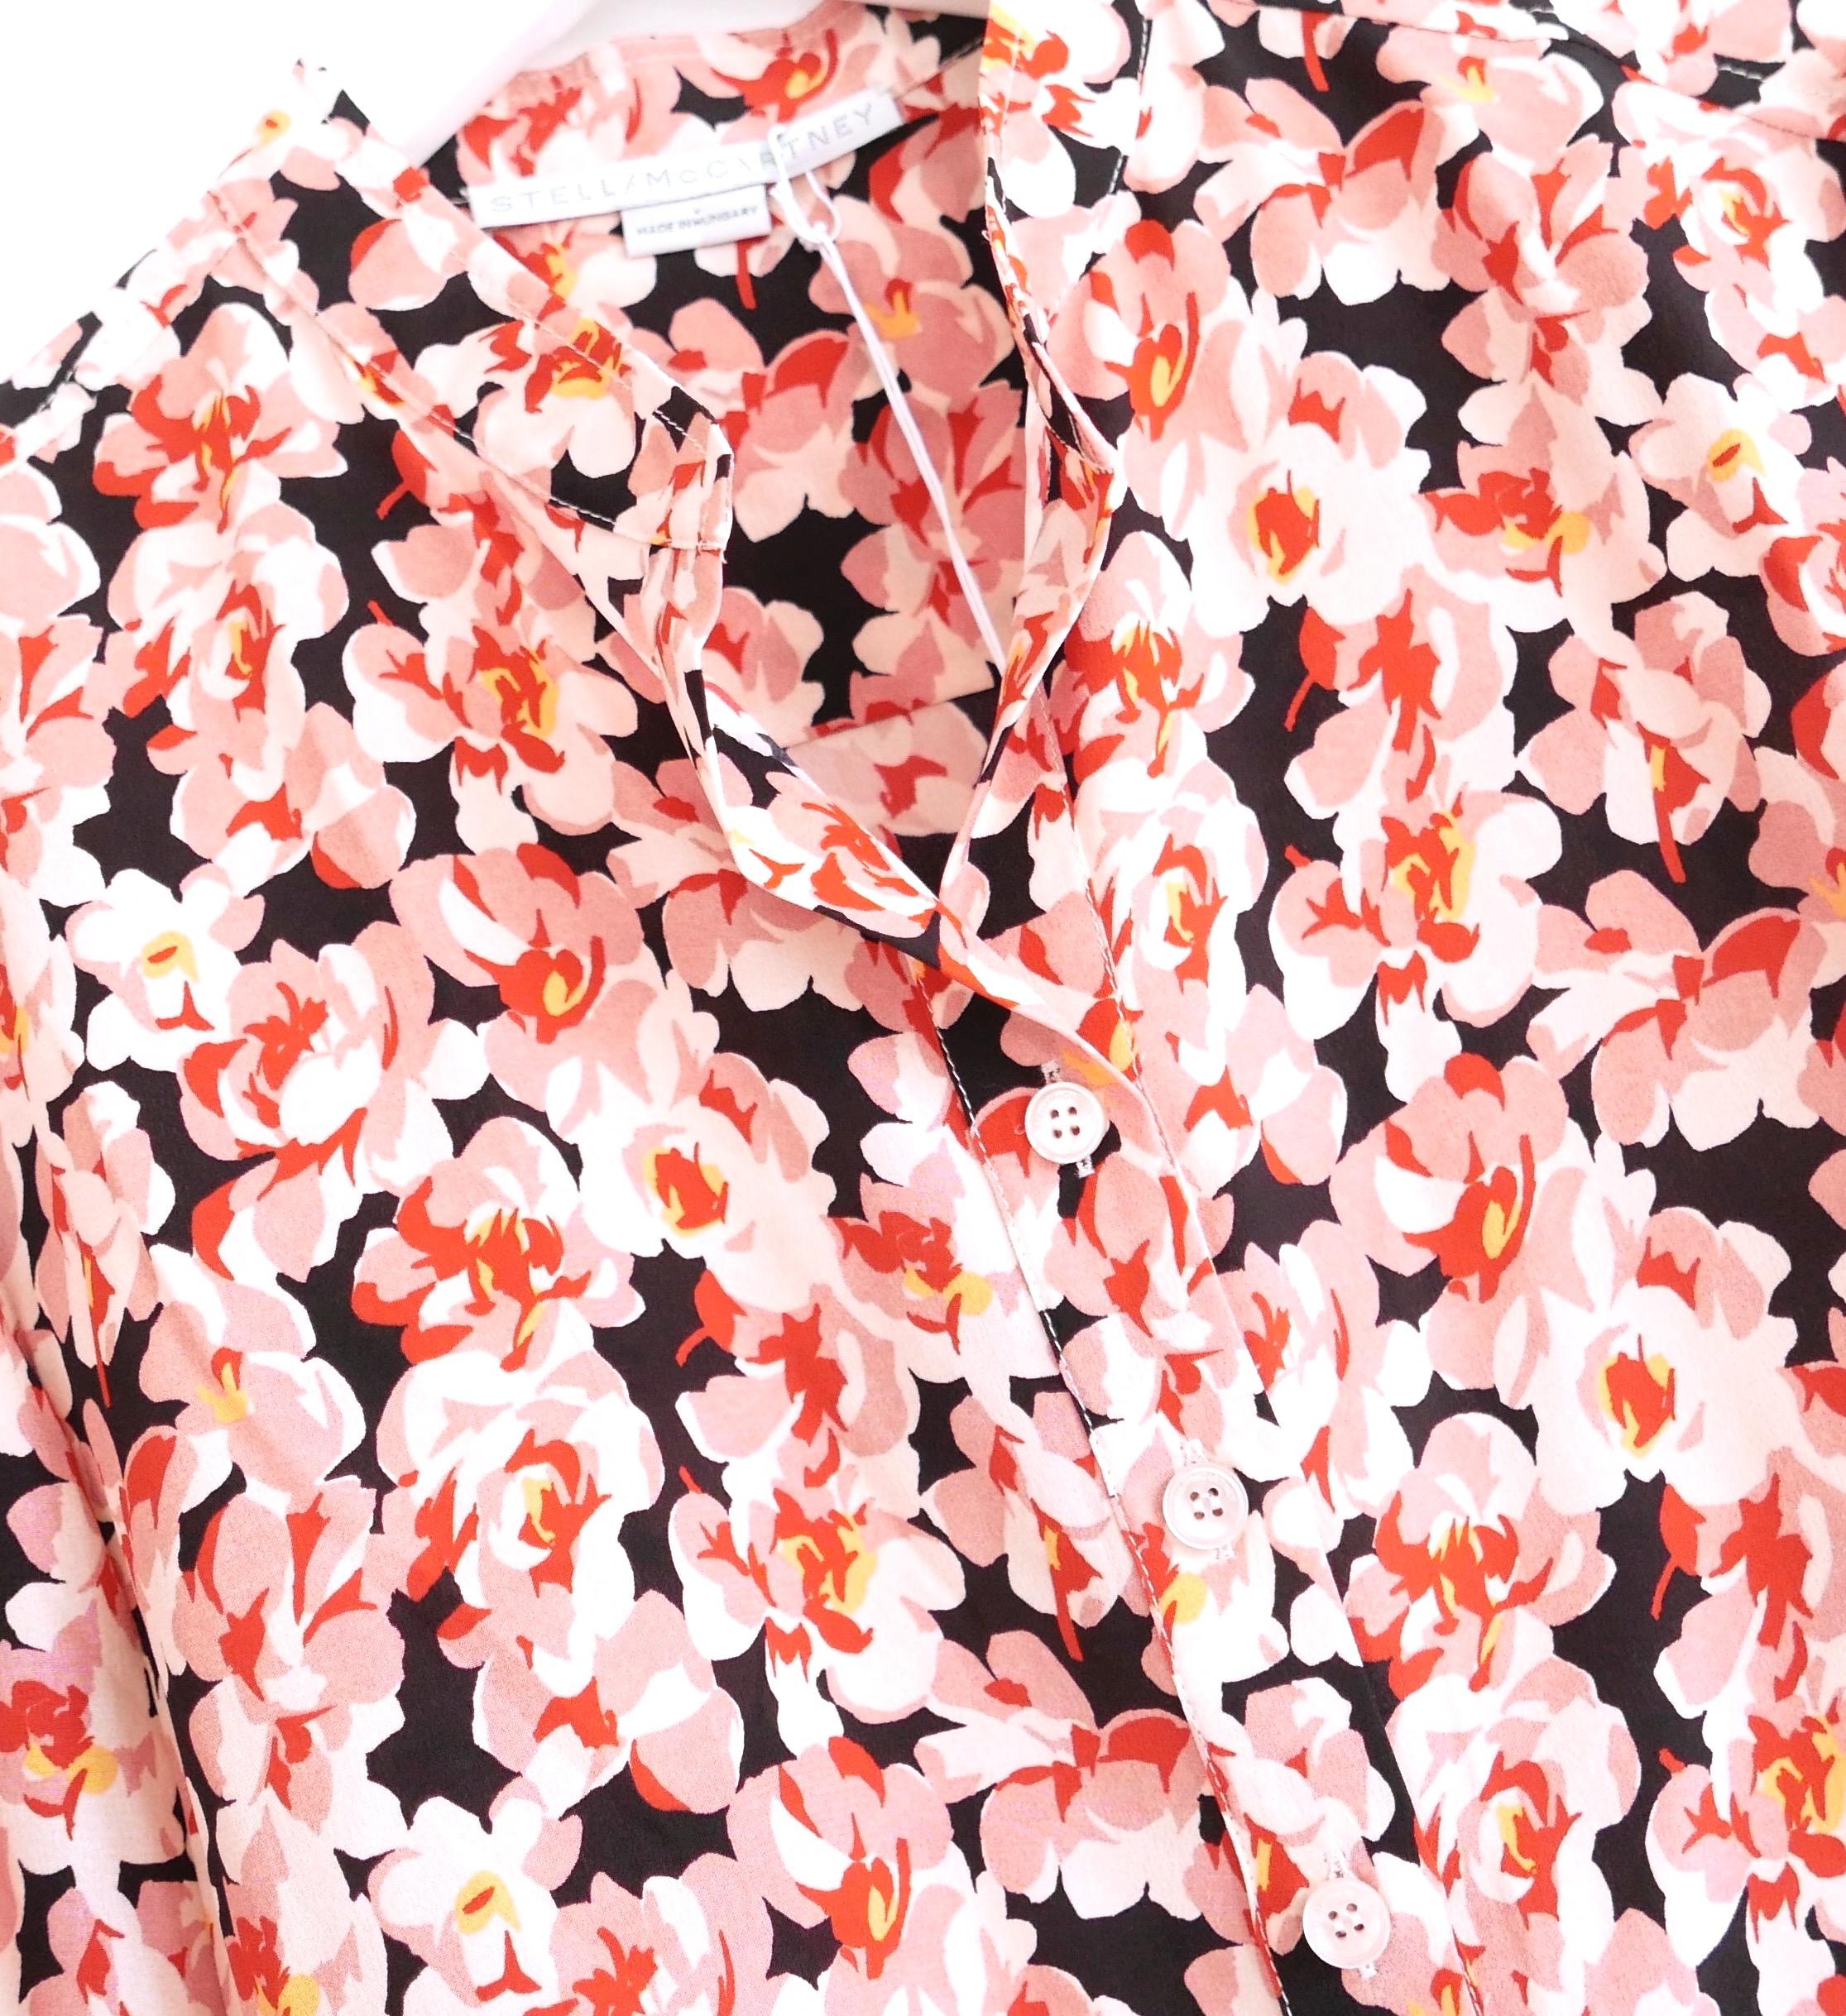 Gorgeous Stella McCartney floral print silk shirt. Bought for £595 and new with tags/spare button. Made from pink and coral blossom print silk crepe de chine, it has a very relaxed fit with open neck, button front and curved hem. Size IT34/UK2 and